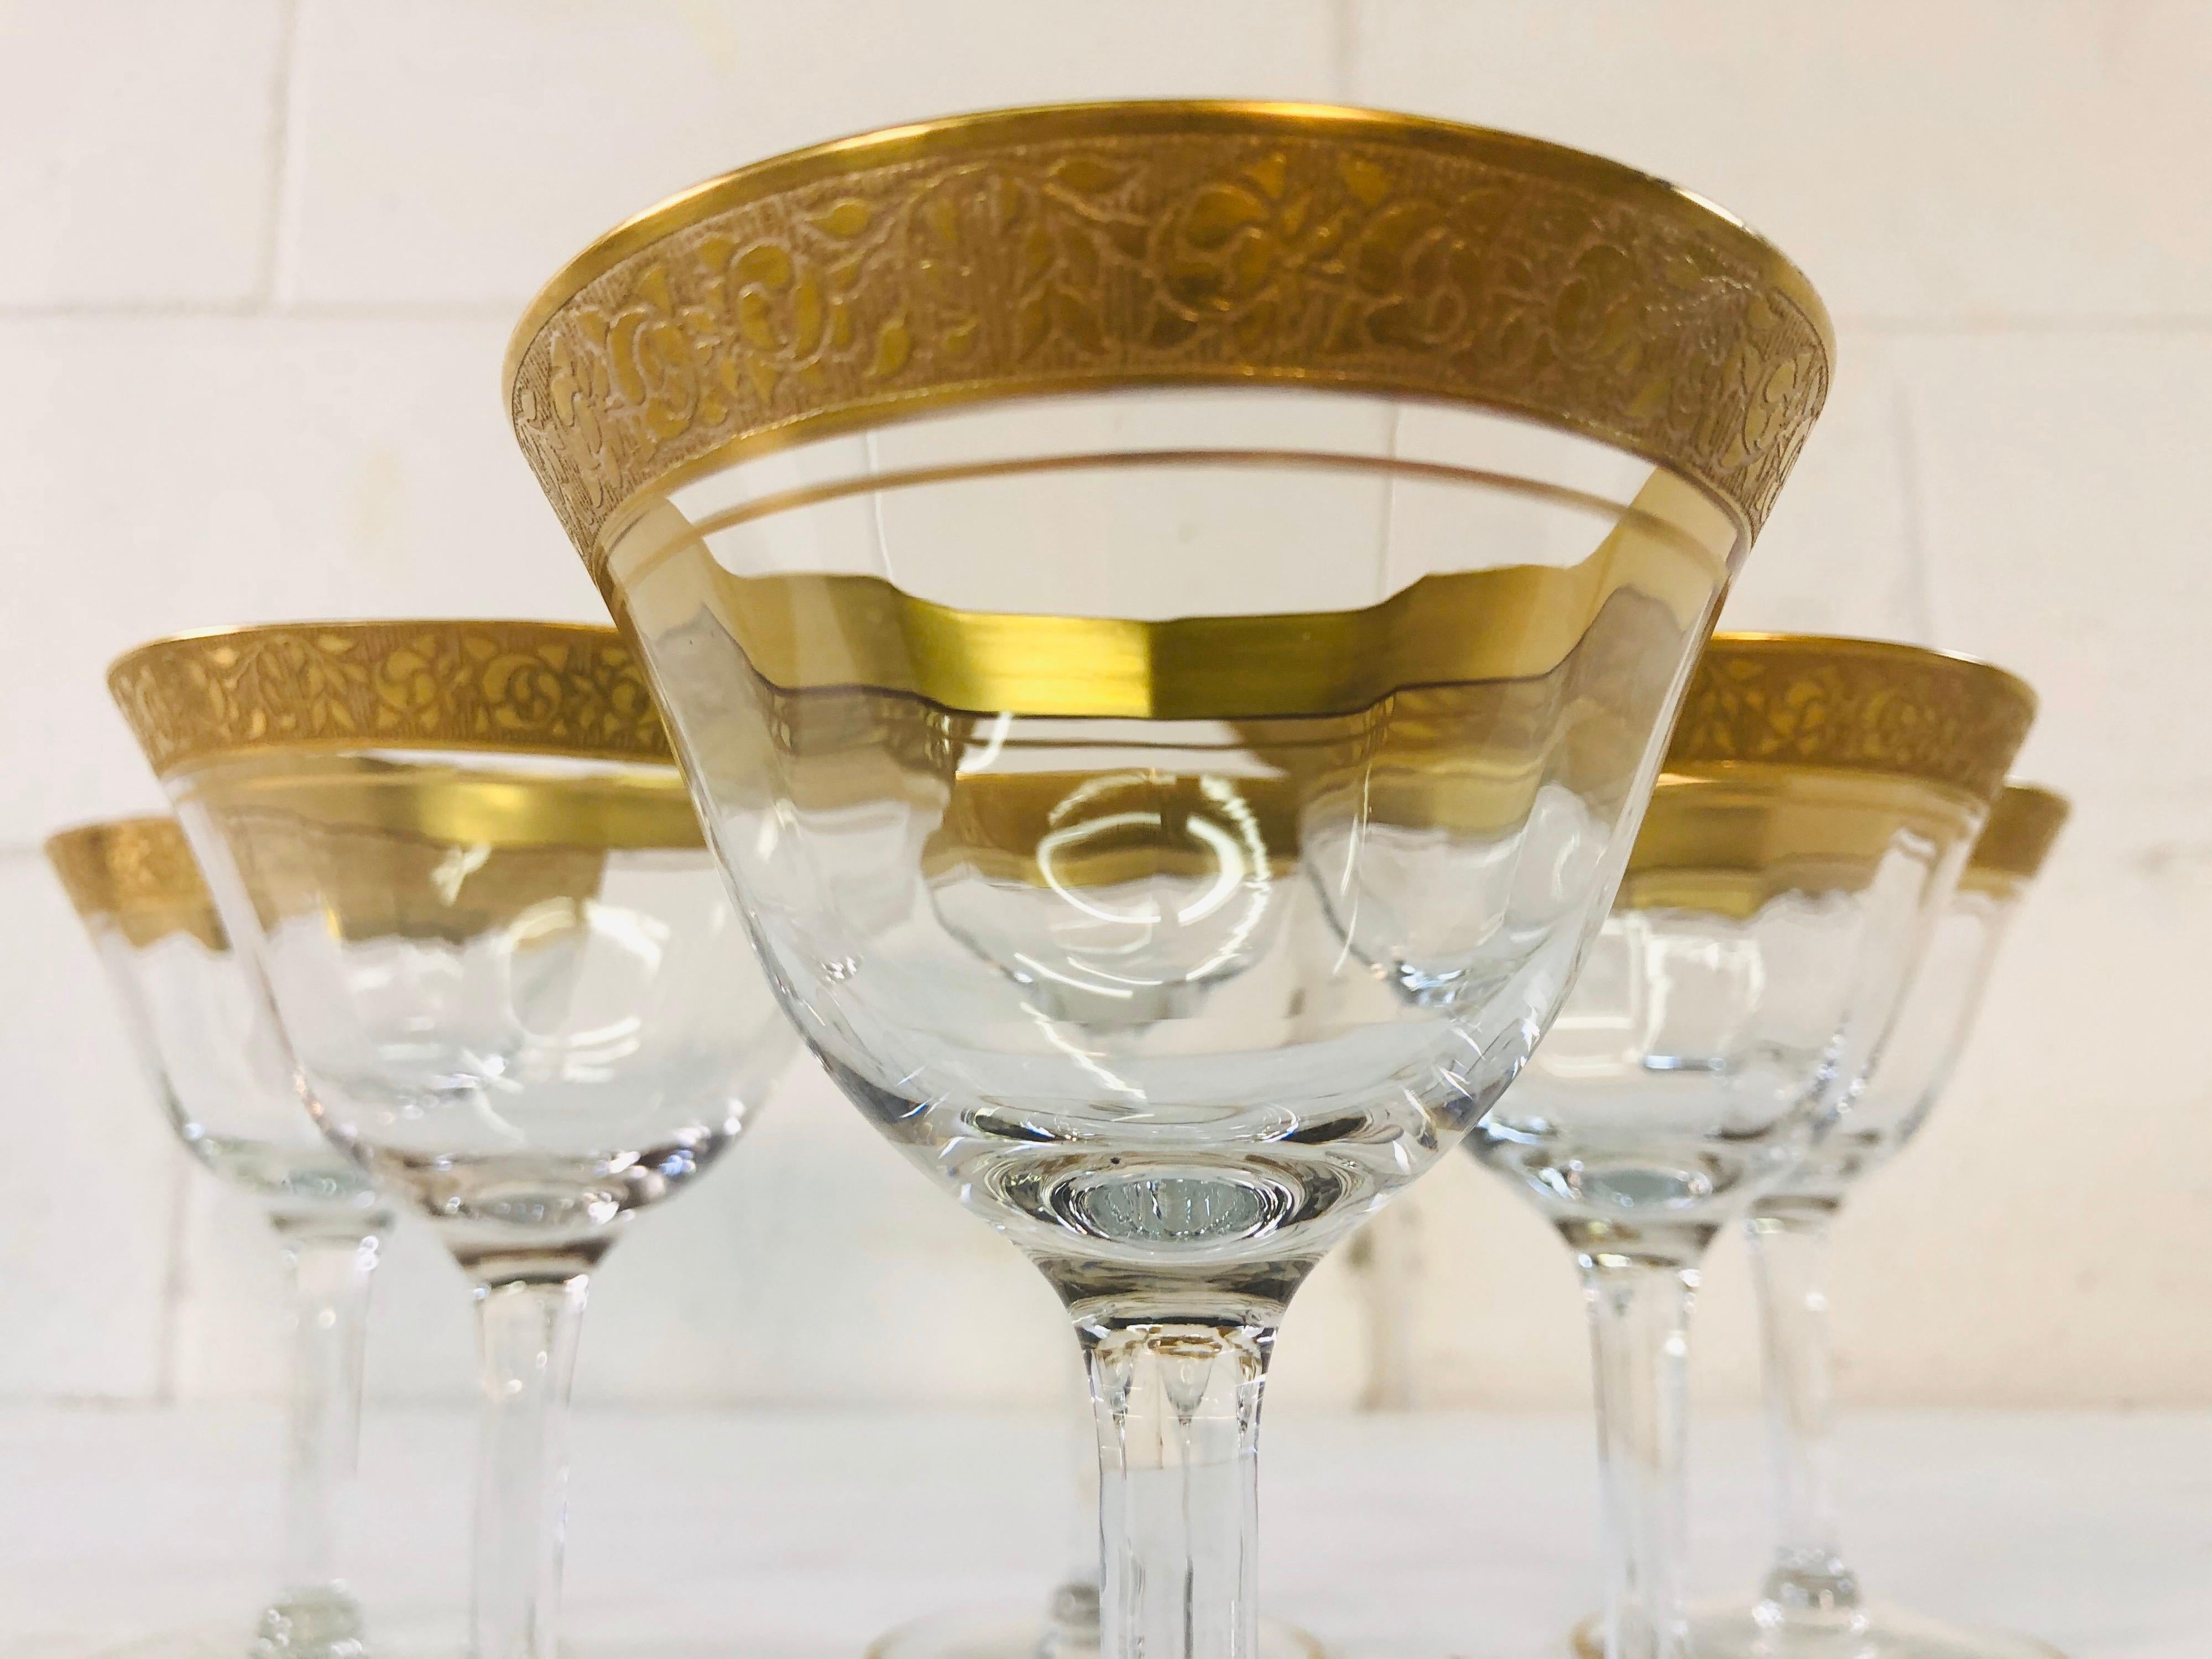 Glass 1930s Art Deco Style Tiffin Gold Rim Coupes, Set of 6 For Sale